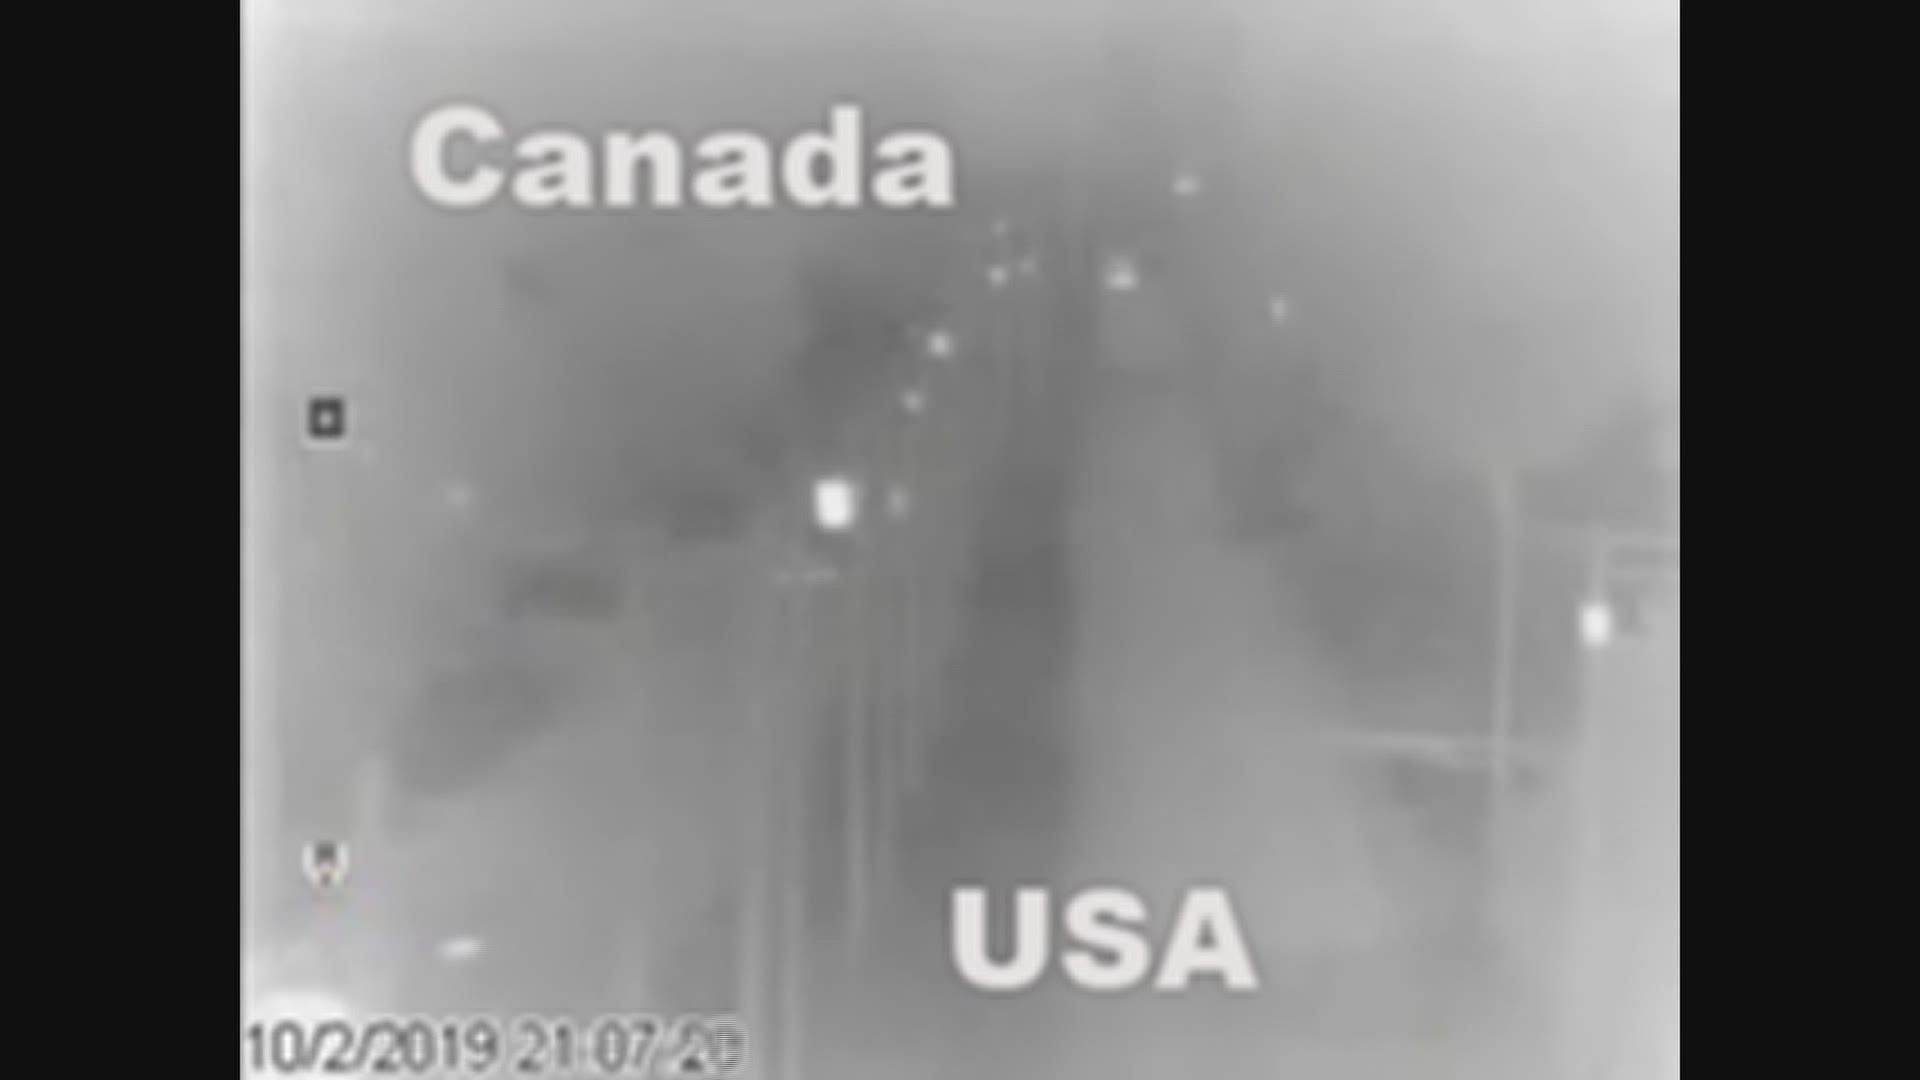 Surveillance video shows a British family of 7 crossing illegally into Washington from Canada. The family has since been deported, according to their lawyer.